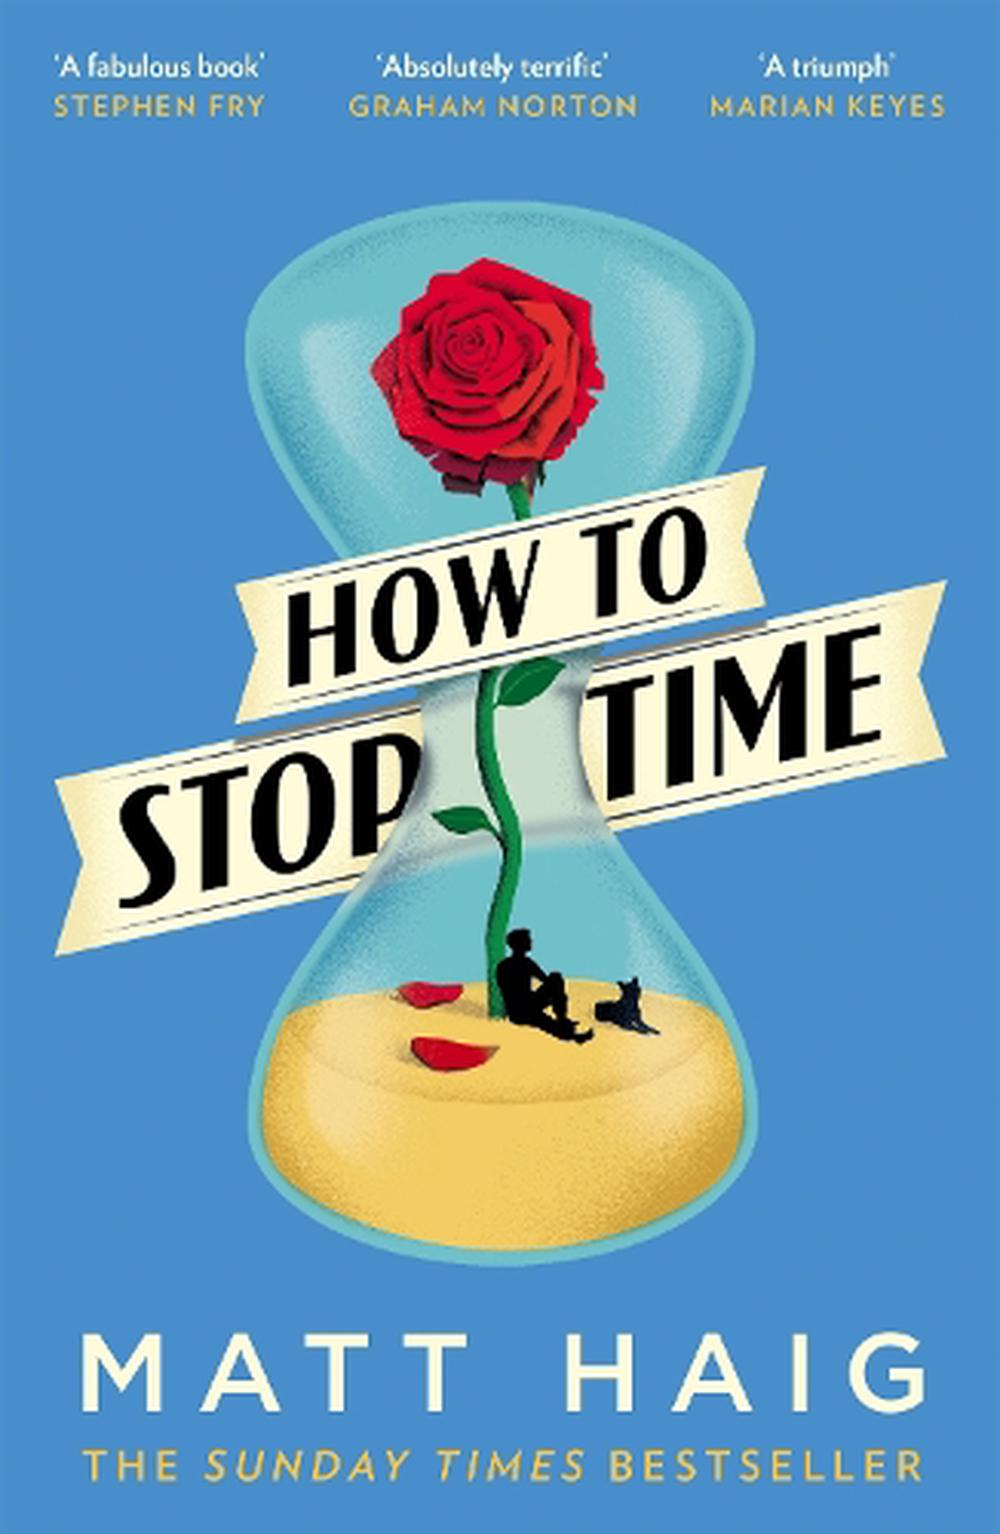 How To Stop Time By Matt Haig Paperback 9781782118640 Buy Online At